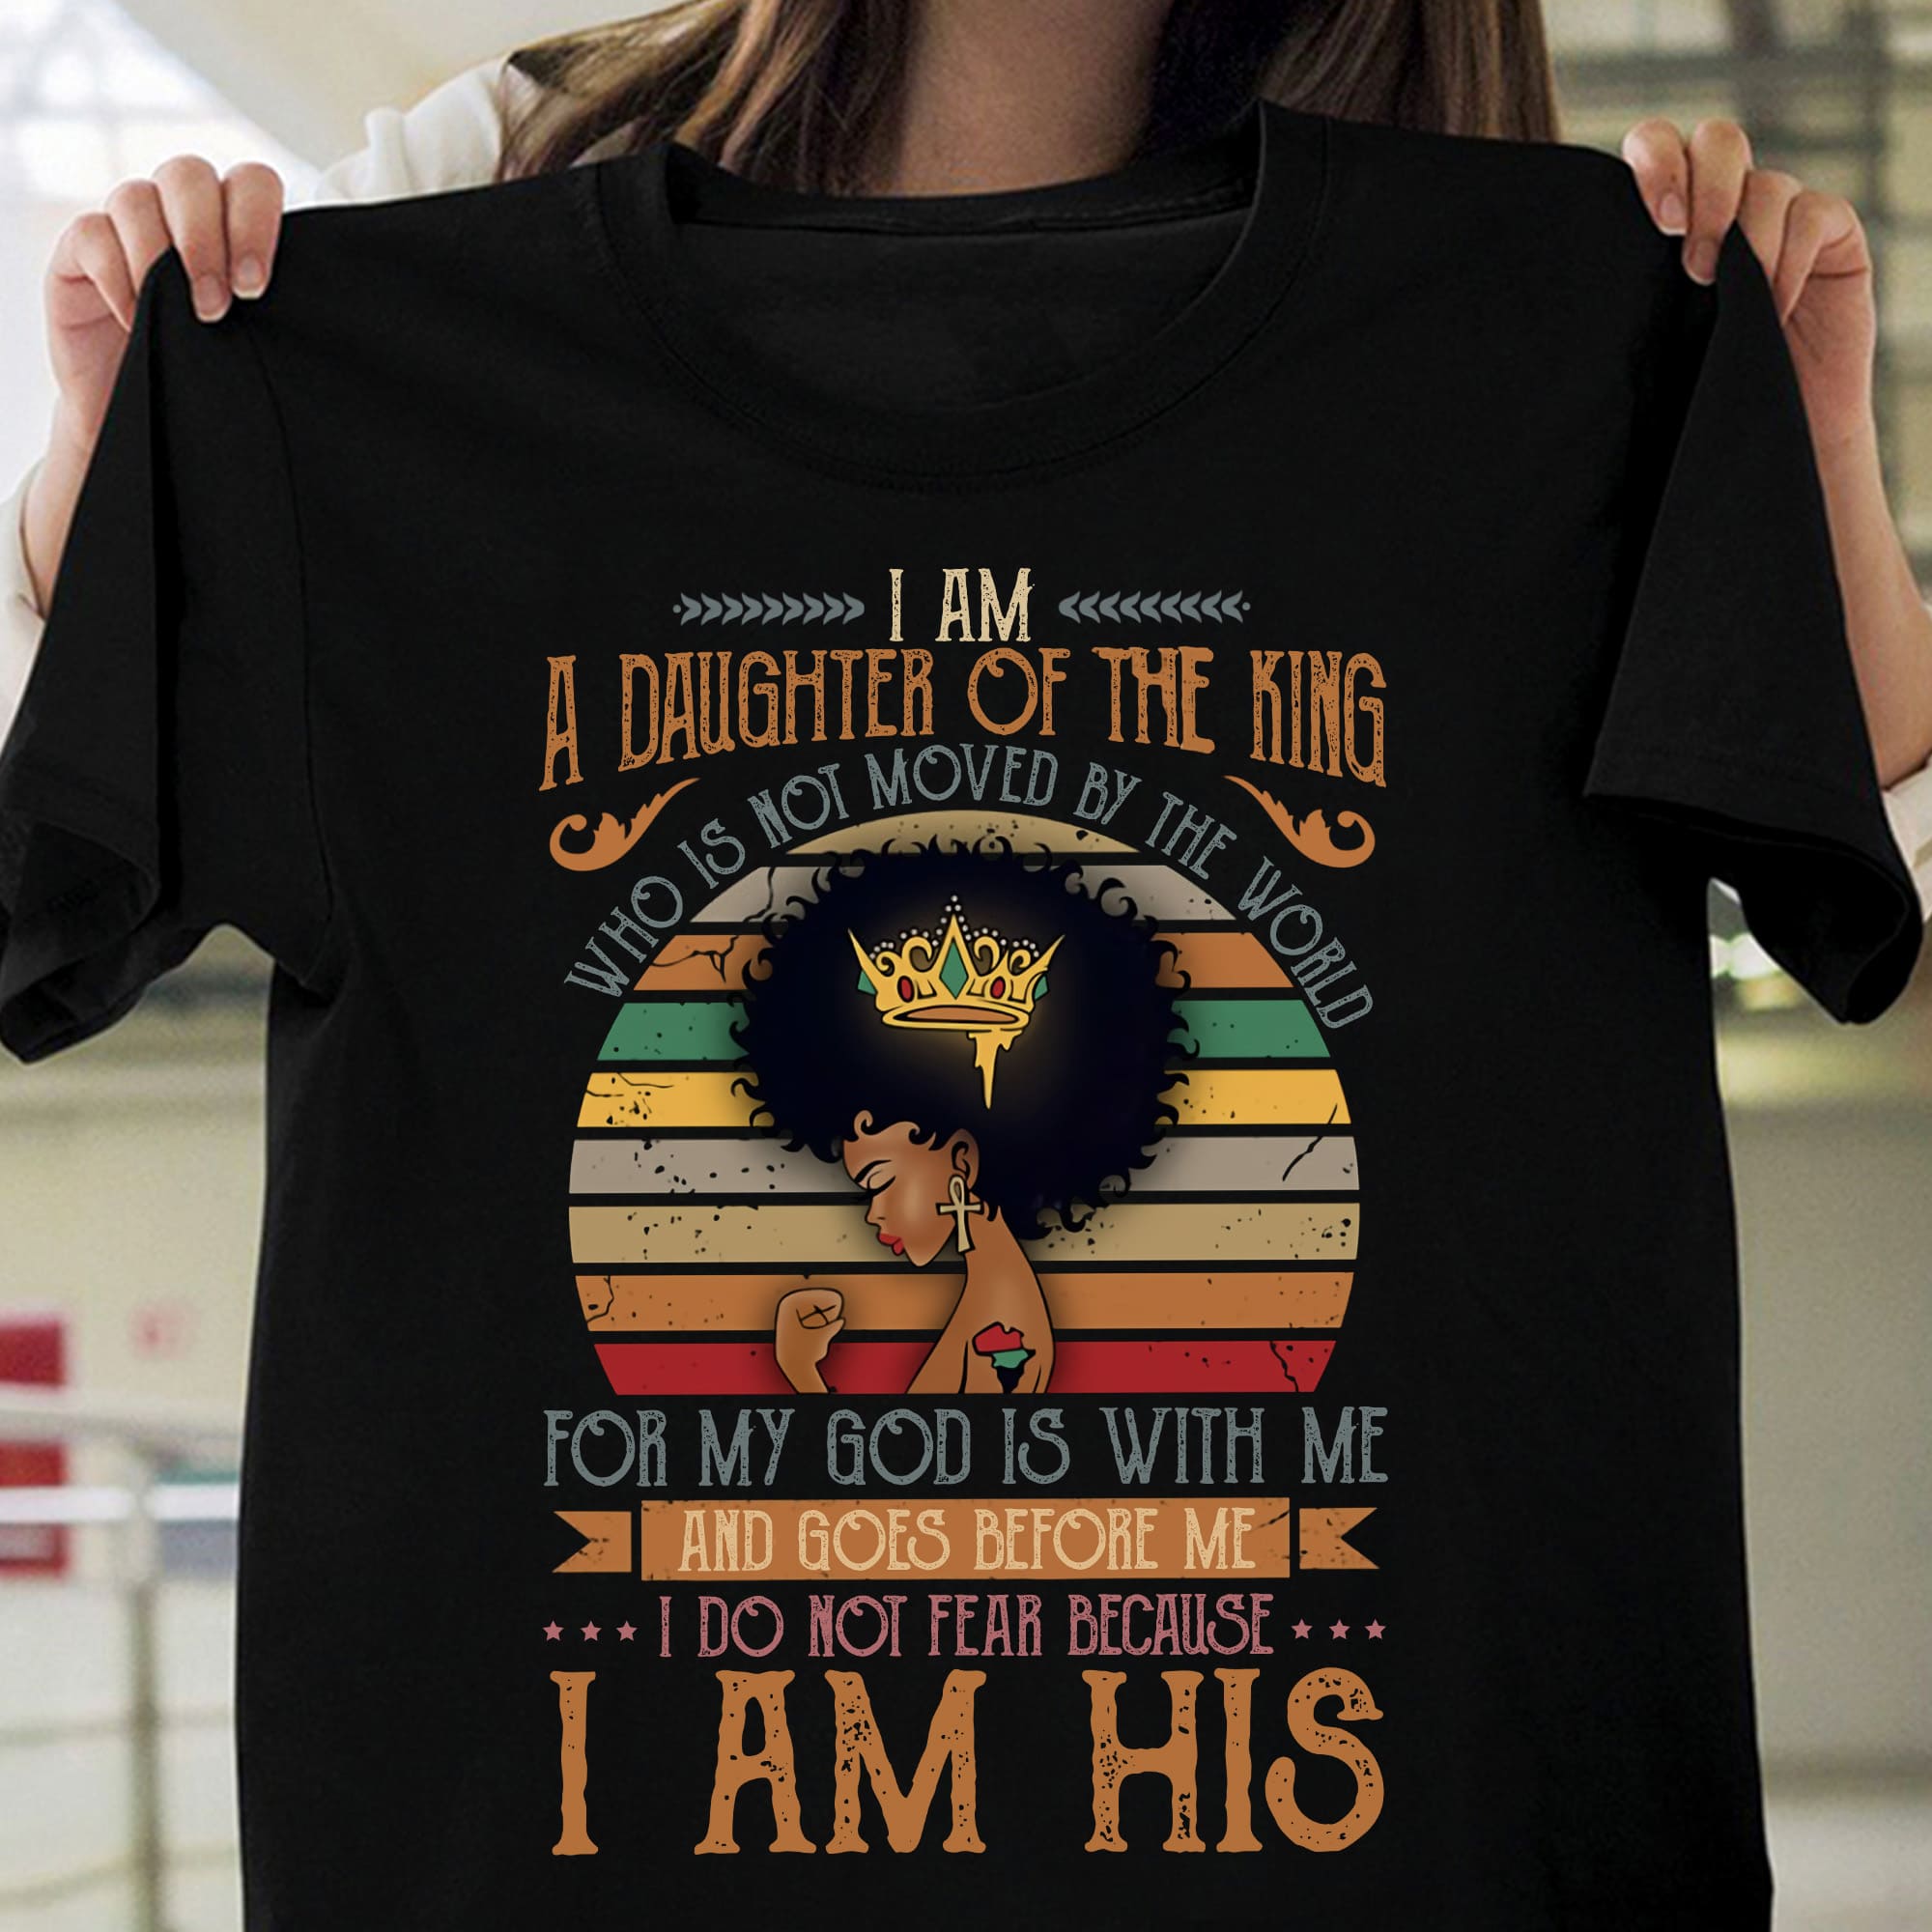 I am a daughter of the king who is not moved by the world - Black princess, gift for black woman